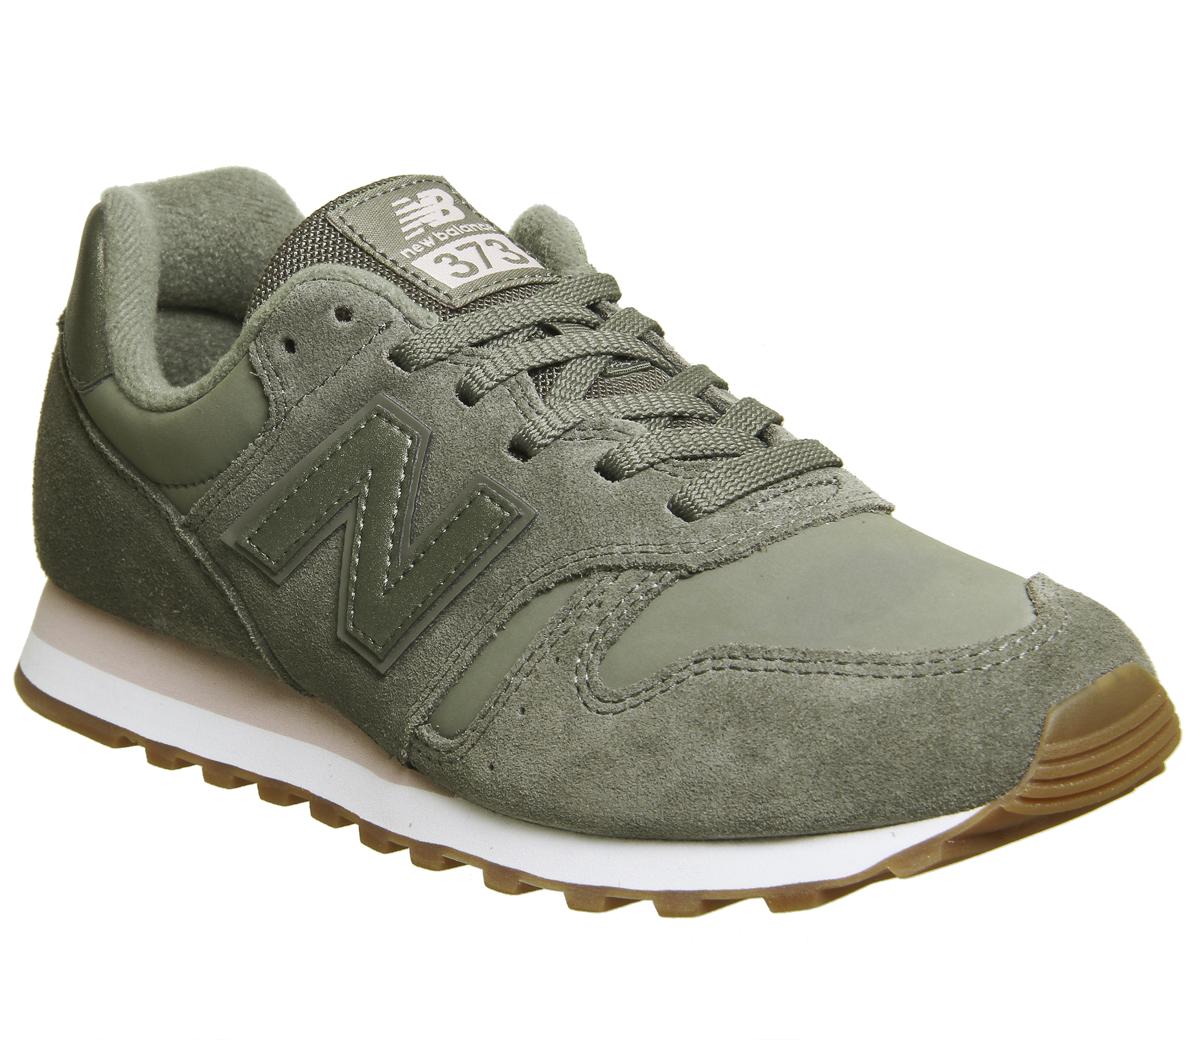 New Balance Khaki Shoes Outlet Sale, UP TO 58% OFF